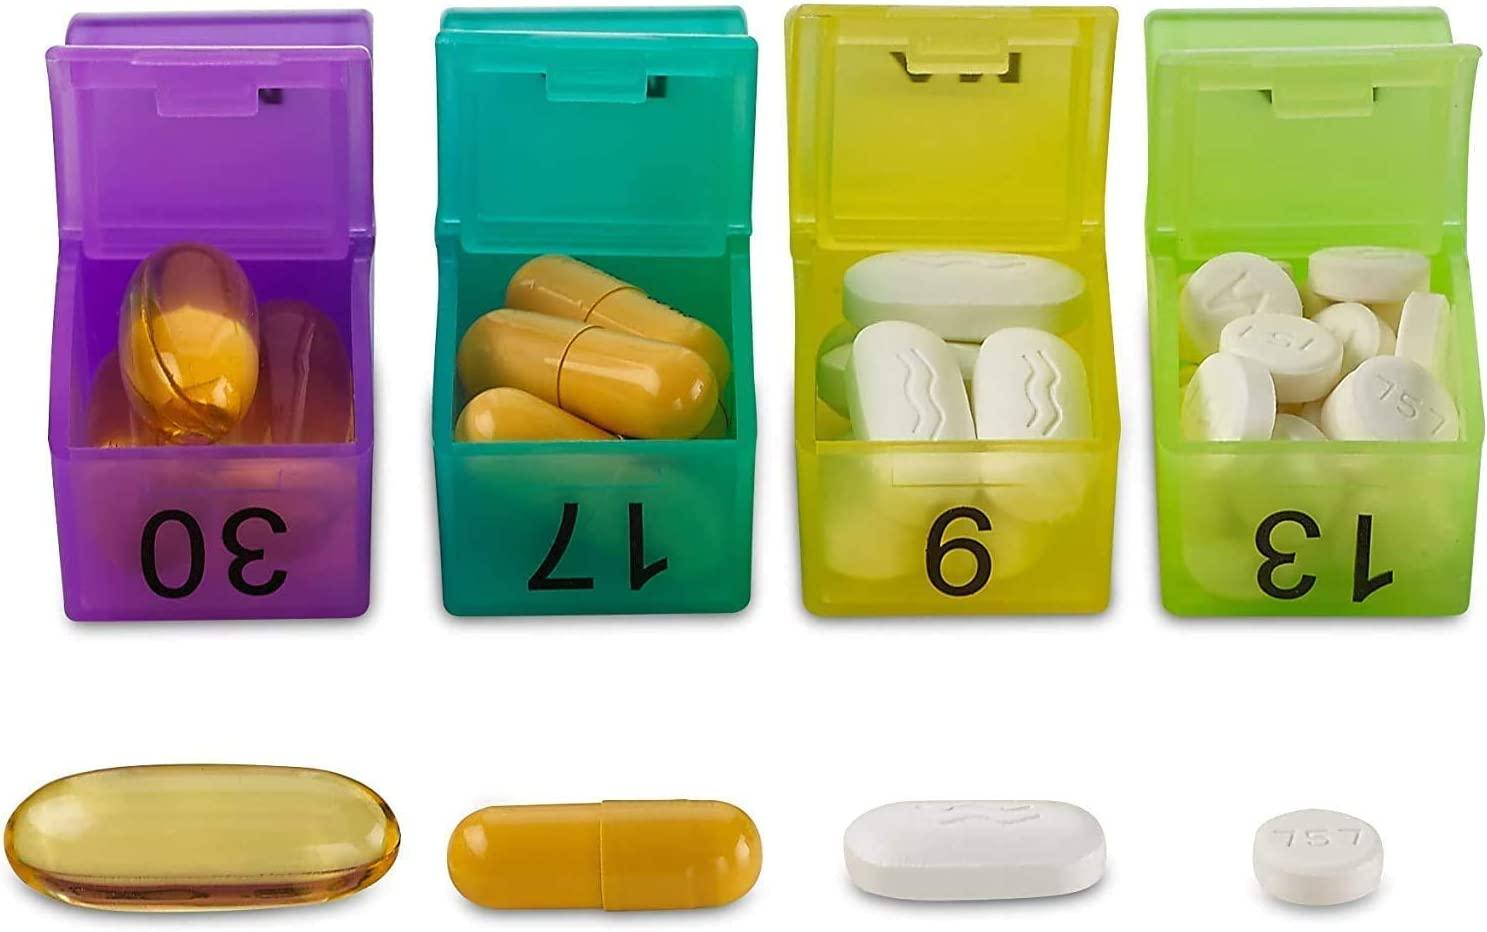 Monthly Pill Organizer - Am/Pm Daily Pill Organizer 32